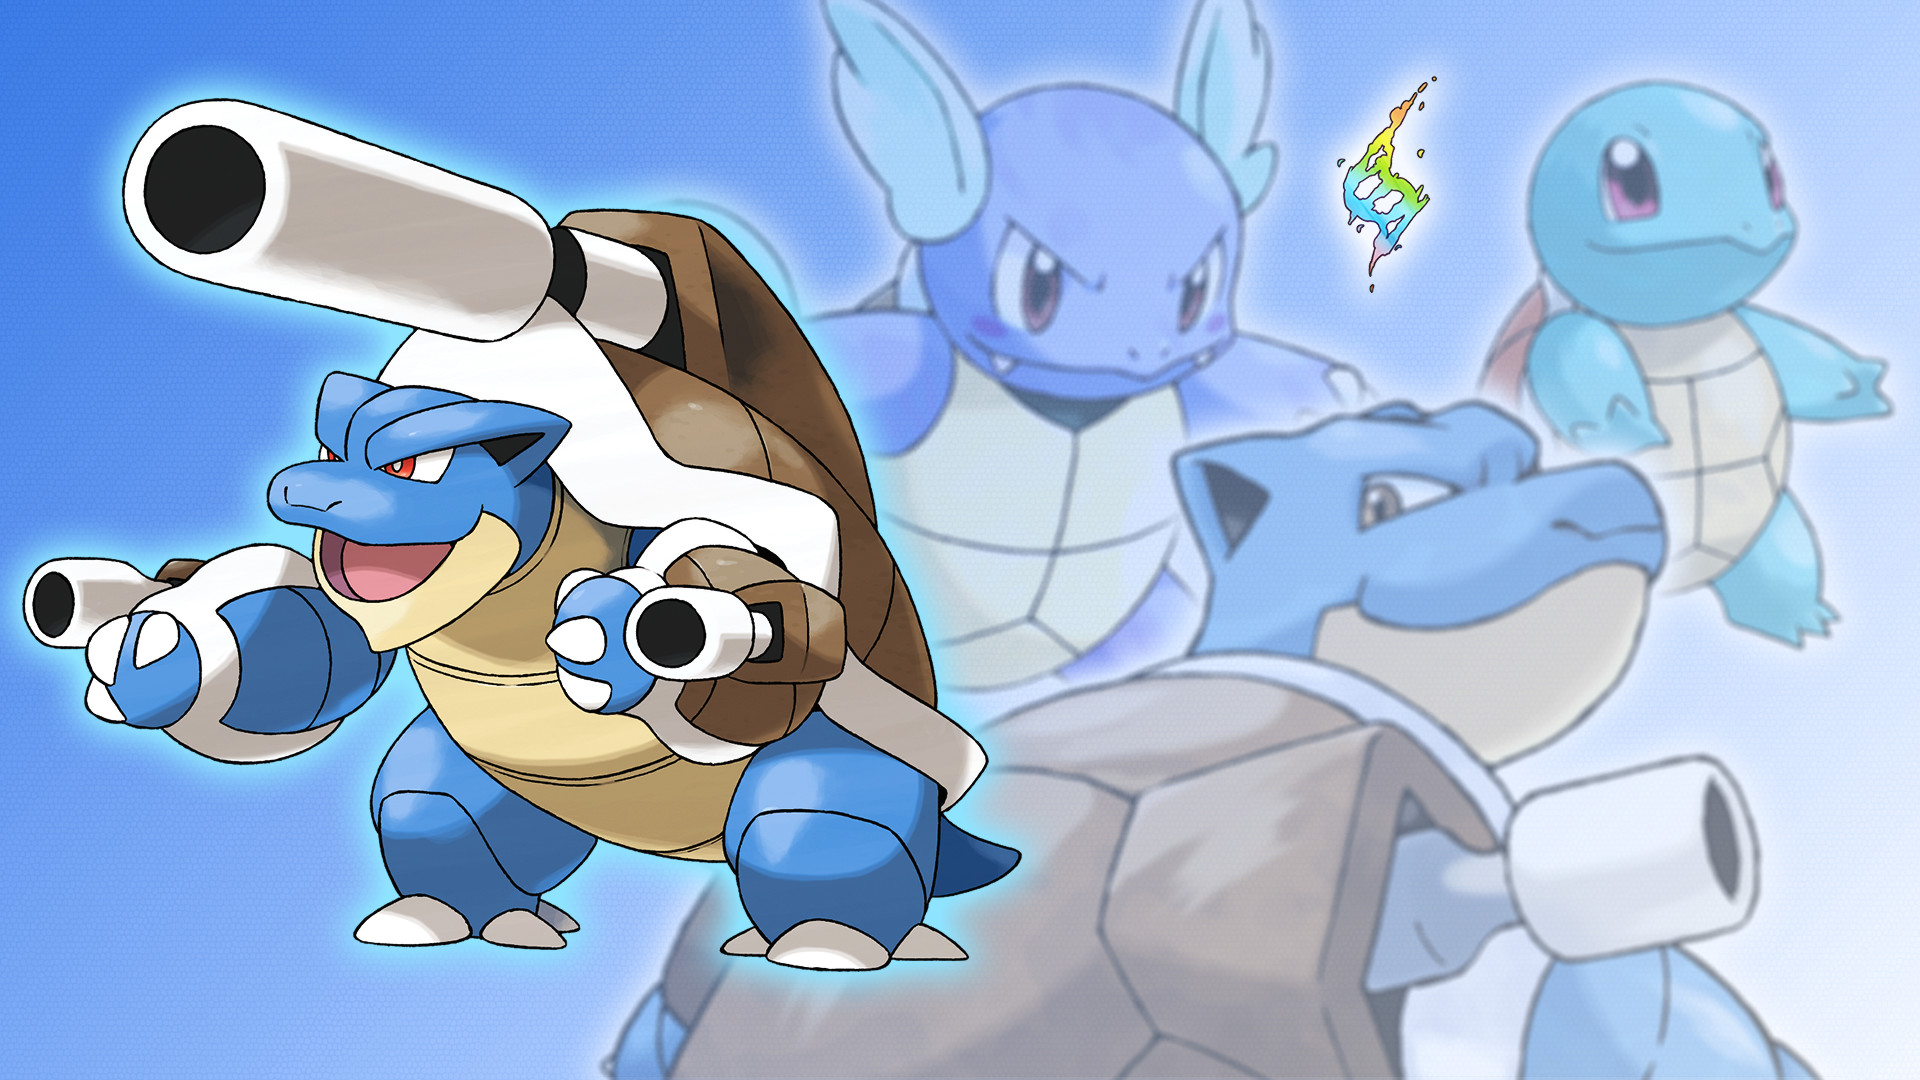 1920x1080 ... Squirtle, Wartortle, Blastoise and Mega Wallpaper by Glench